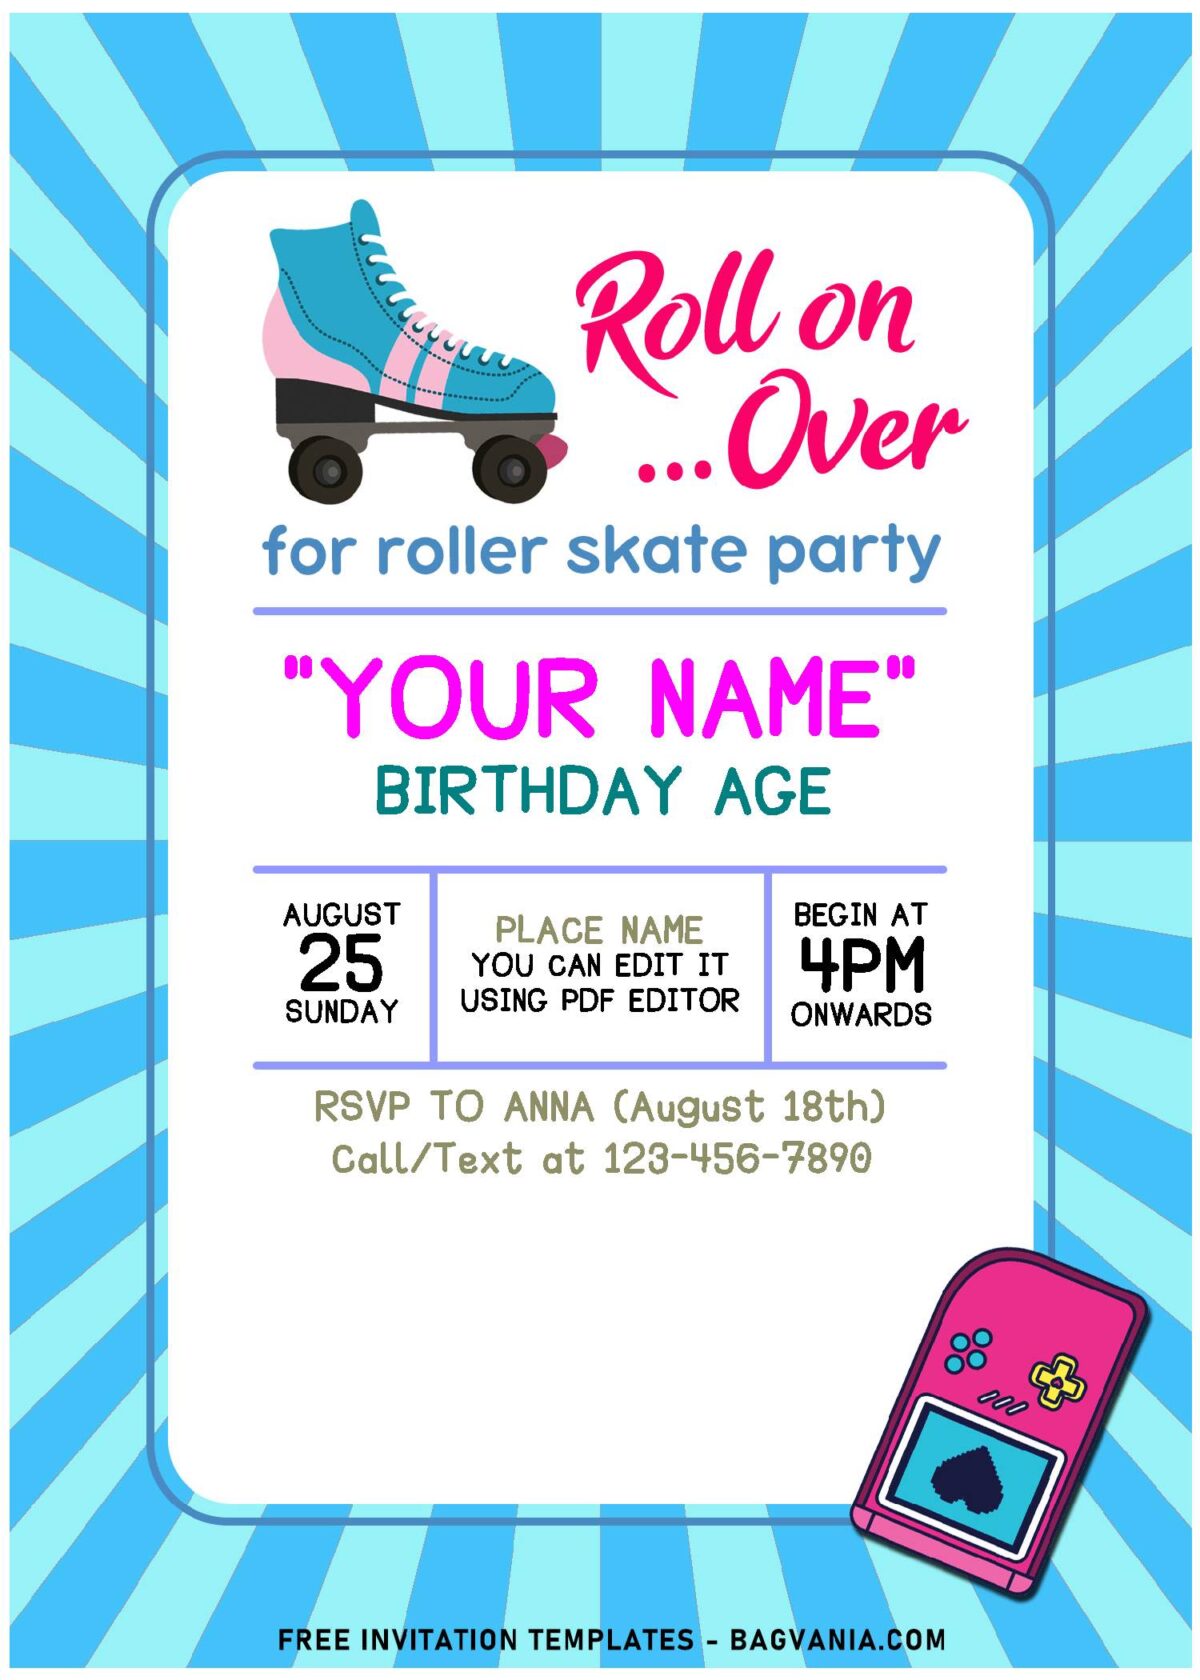 (Free Editable PDF) Cute Pastel Neon Roller Skating Birthday Invitation Templates with cute Roller Skate boots